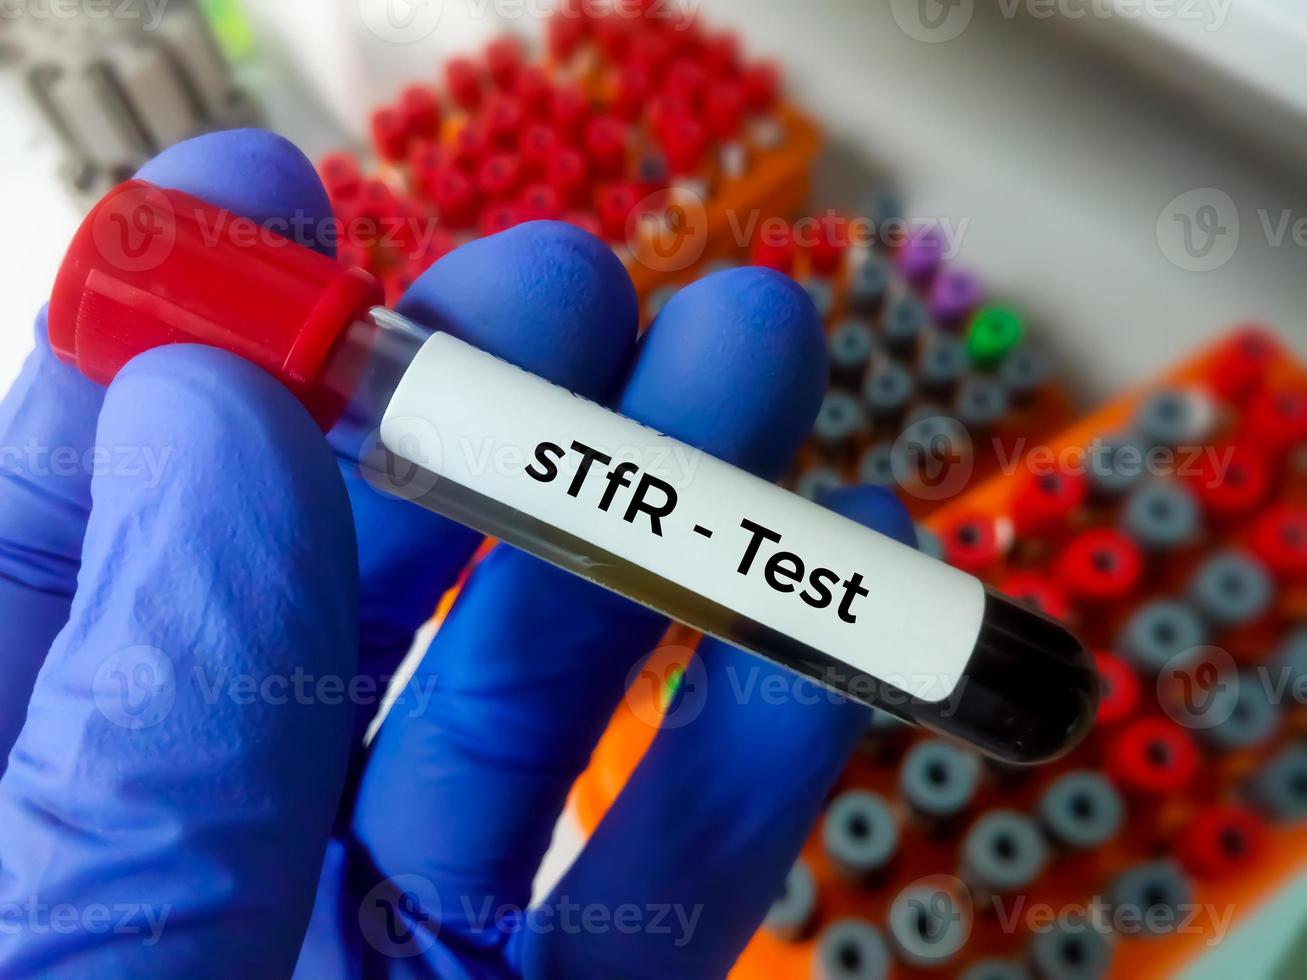 Soluble transferrin receptor or sTfR test. this test help to detect and evaluate iron deficiency and aid in the diagnosis of iron deficiency anemia. photo